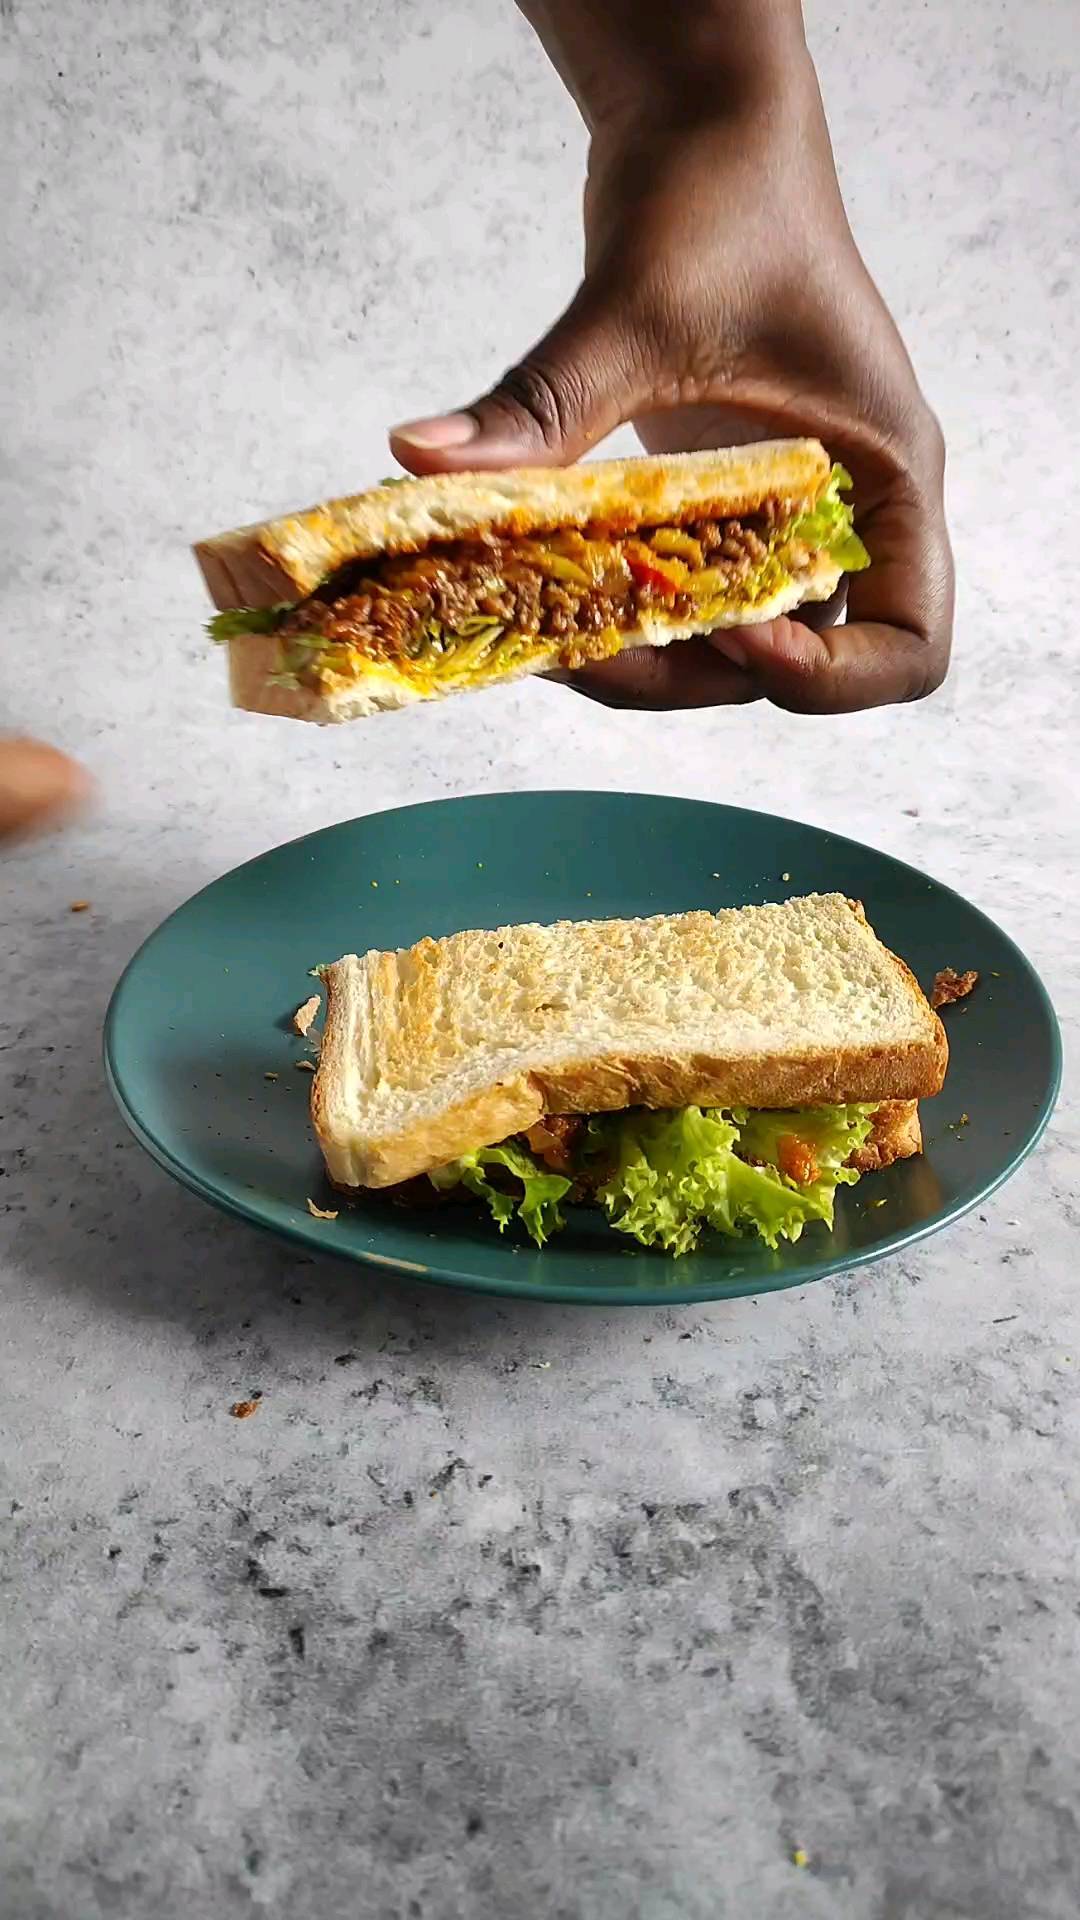 Leftover meat sauce, how about a sandwich?

Delicious!